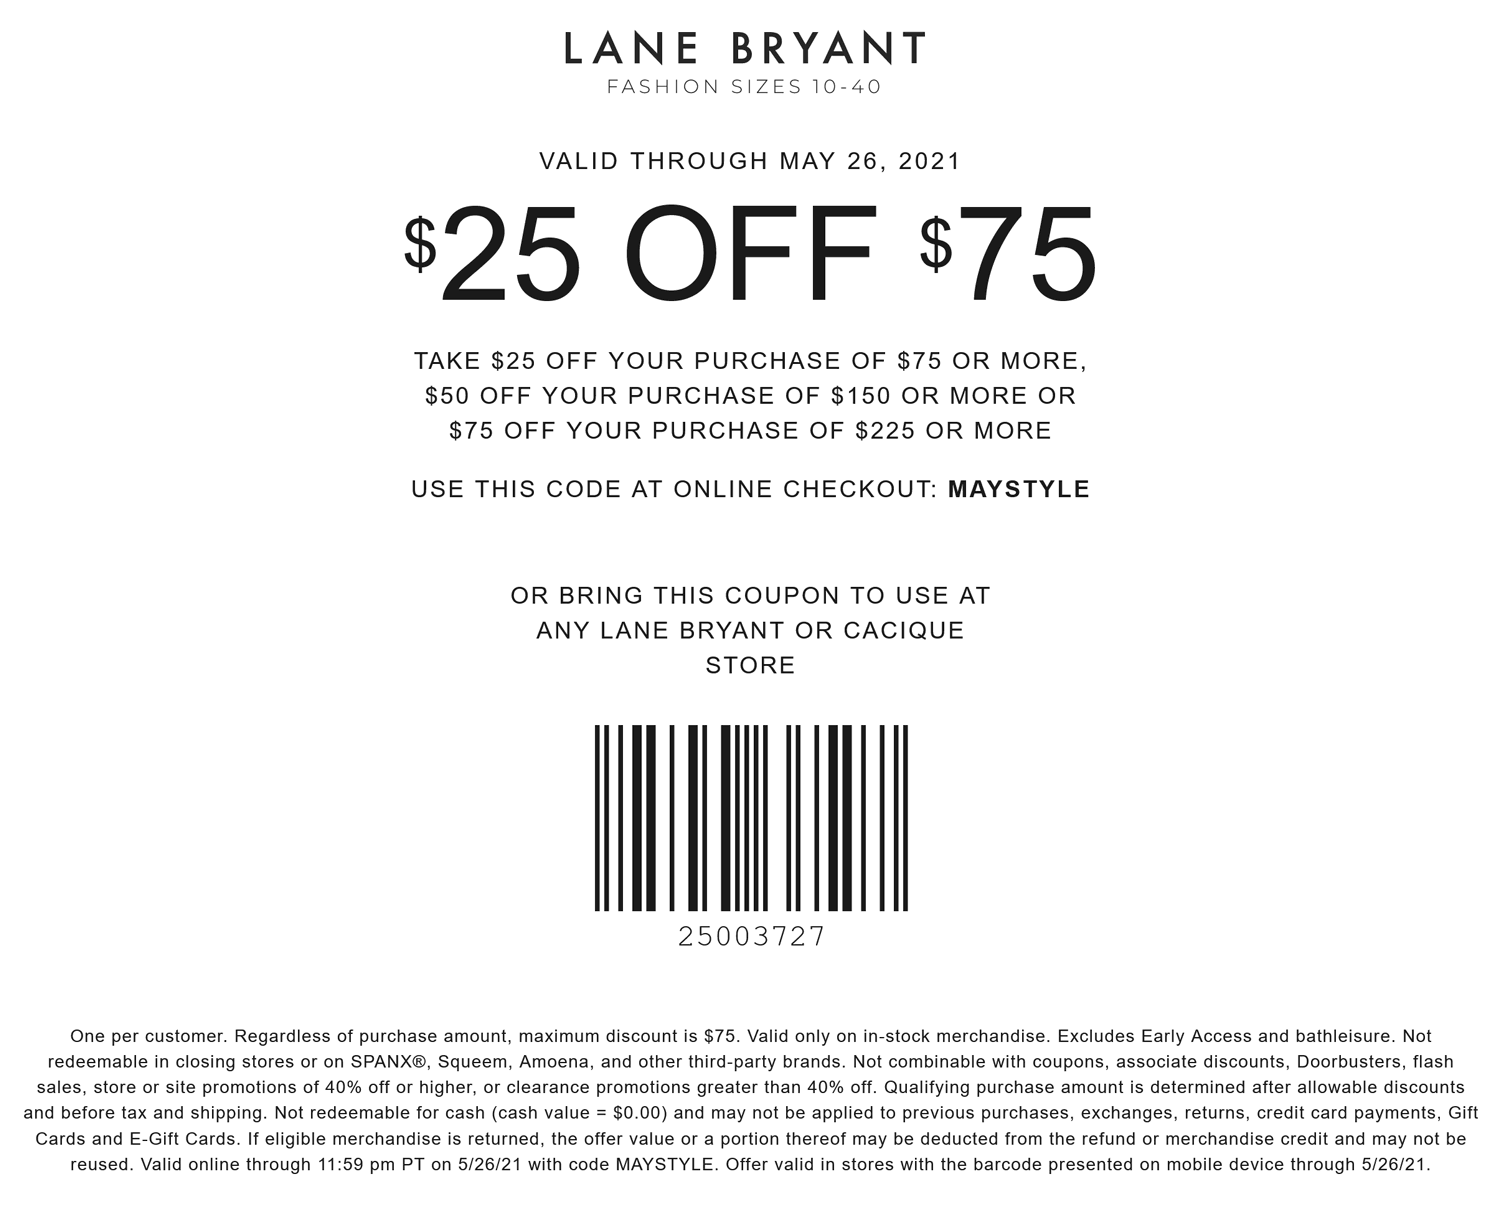 Lane Bryant stores Coupon  $25 off $75 at Lane Bryant, or online via promo code MAYSTYLE #lanebryant 